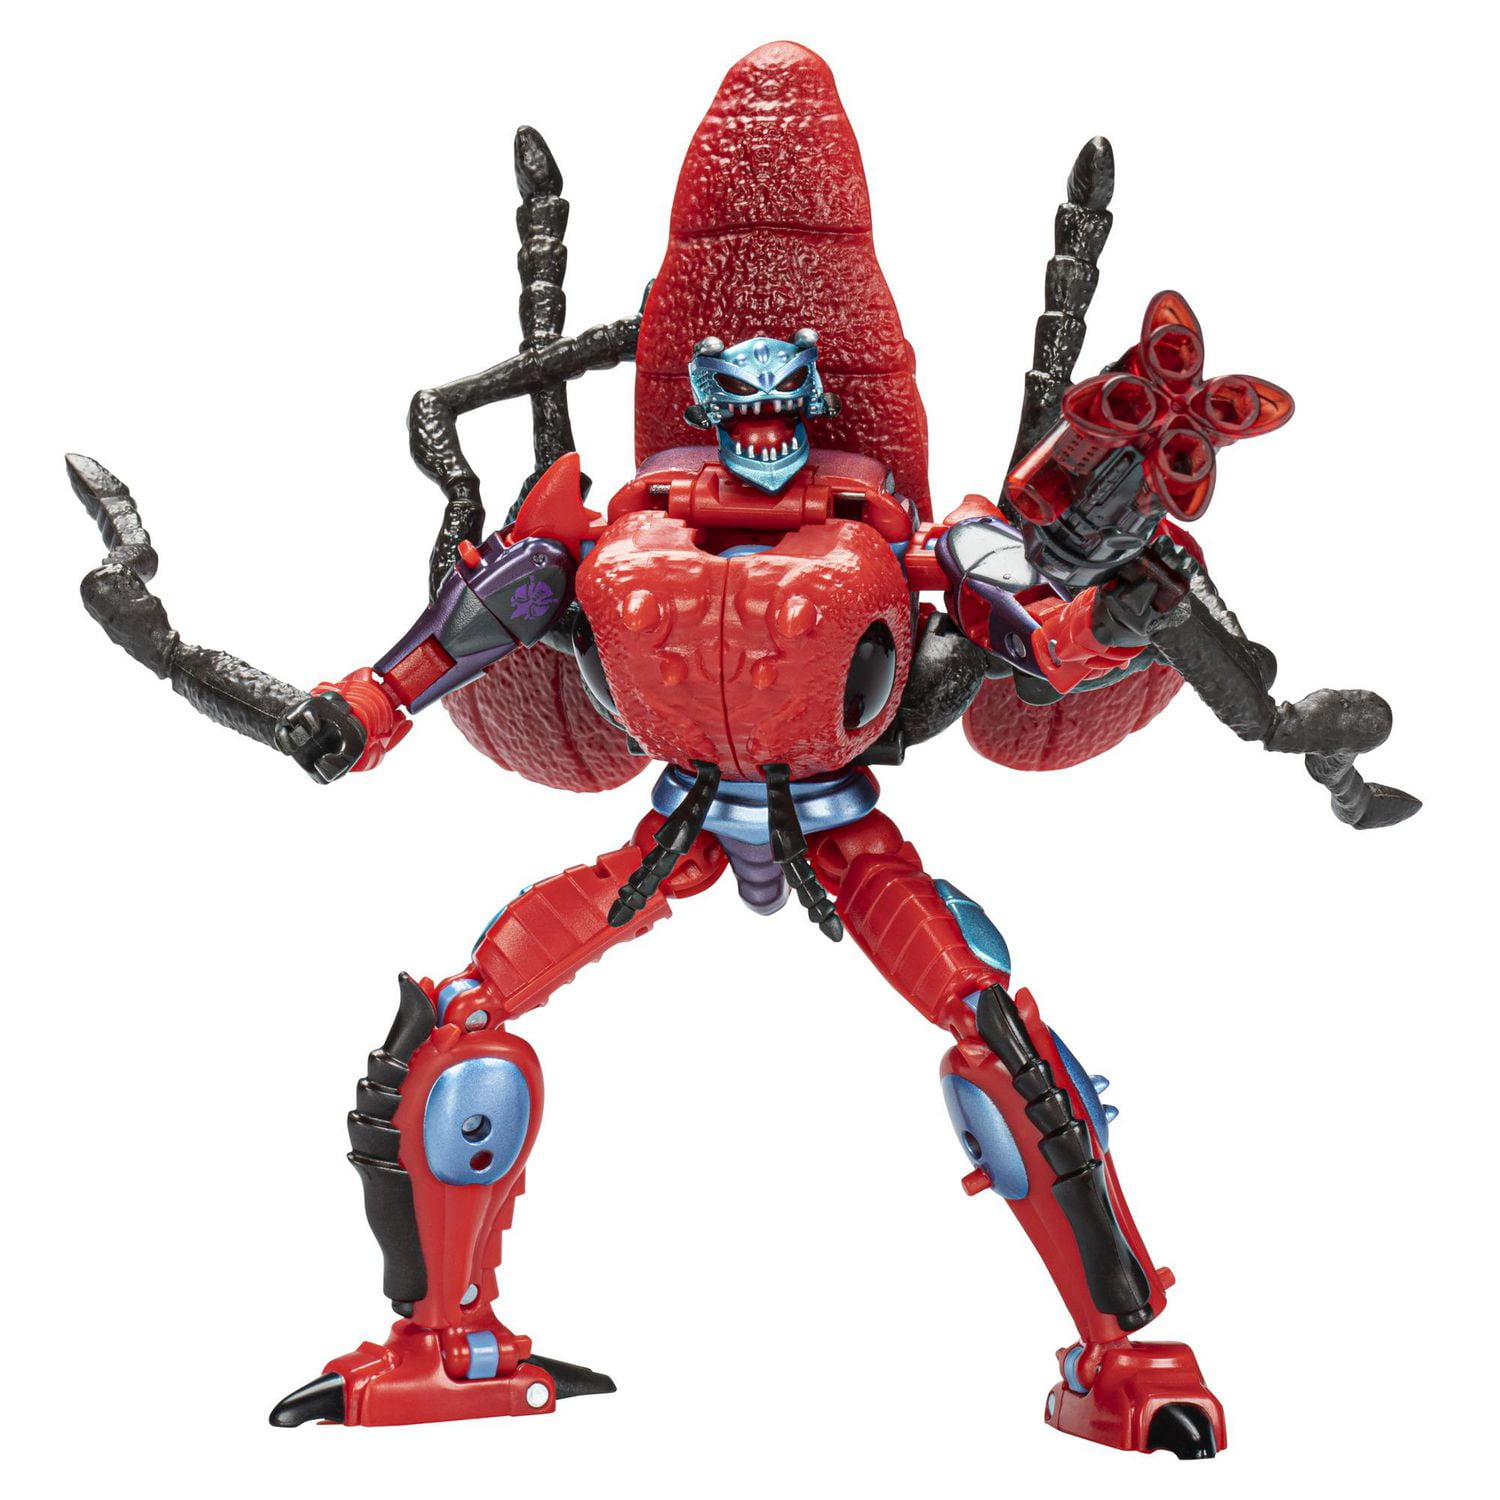 Transformers Toys Generations Legacy Voyager Predacon Inferno Action Figure  - Kids Ages 8 and Up, 7-inch 